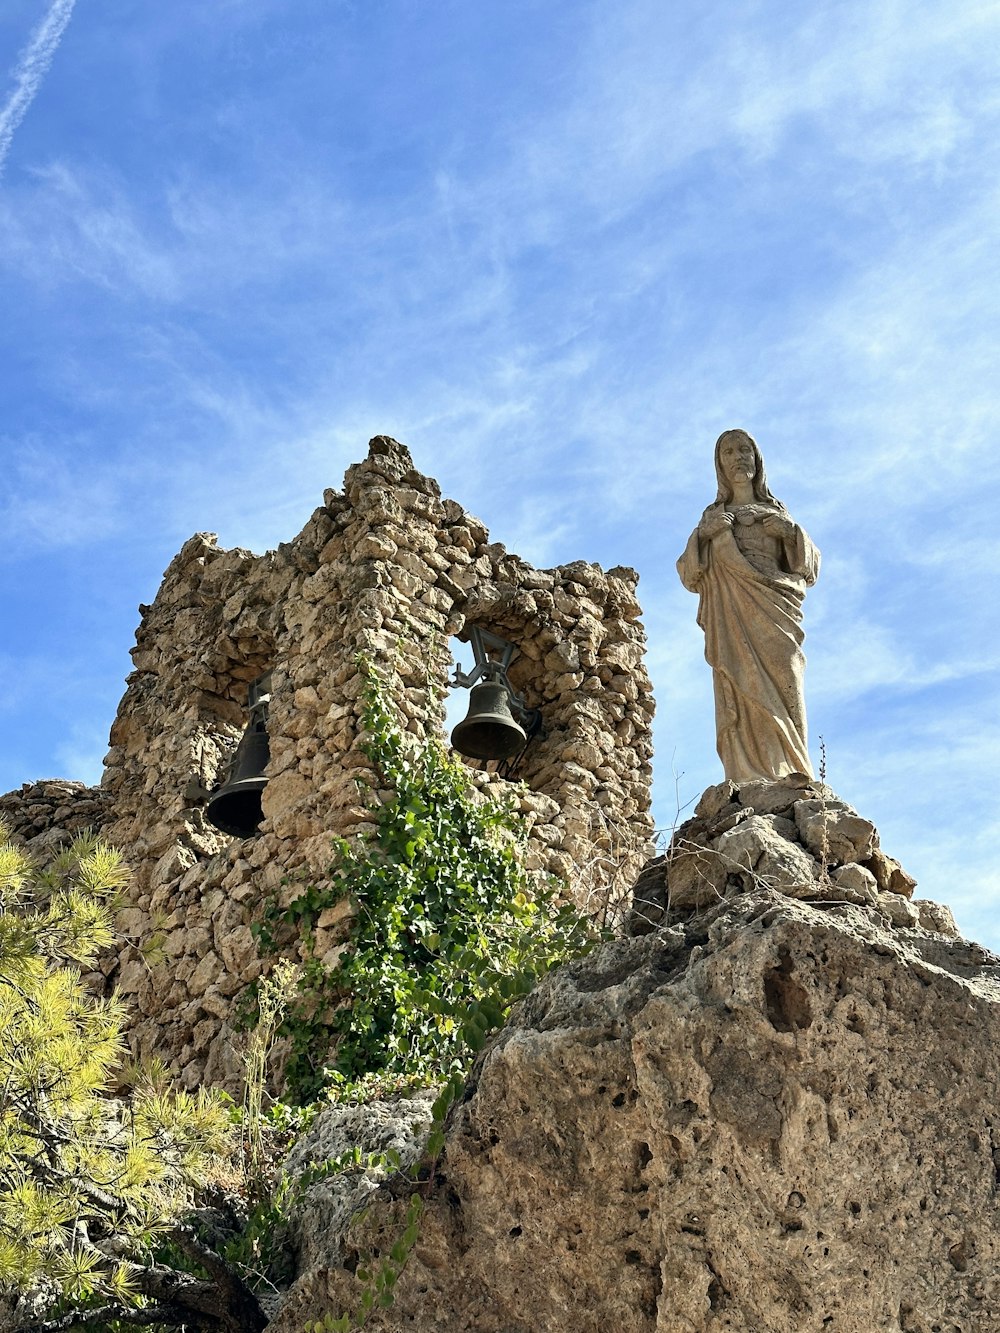 a statue on top of a rock next to a building